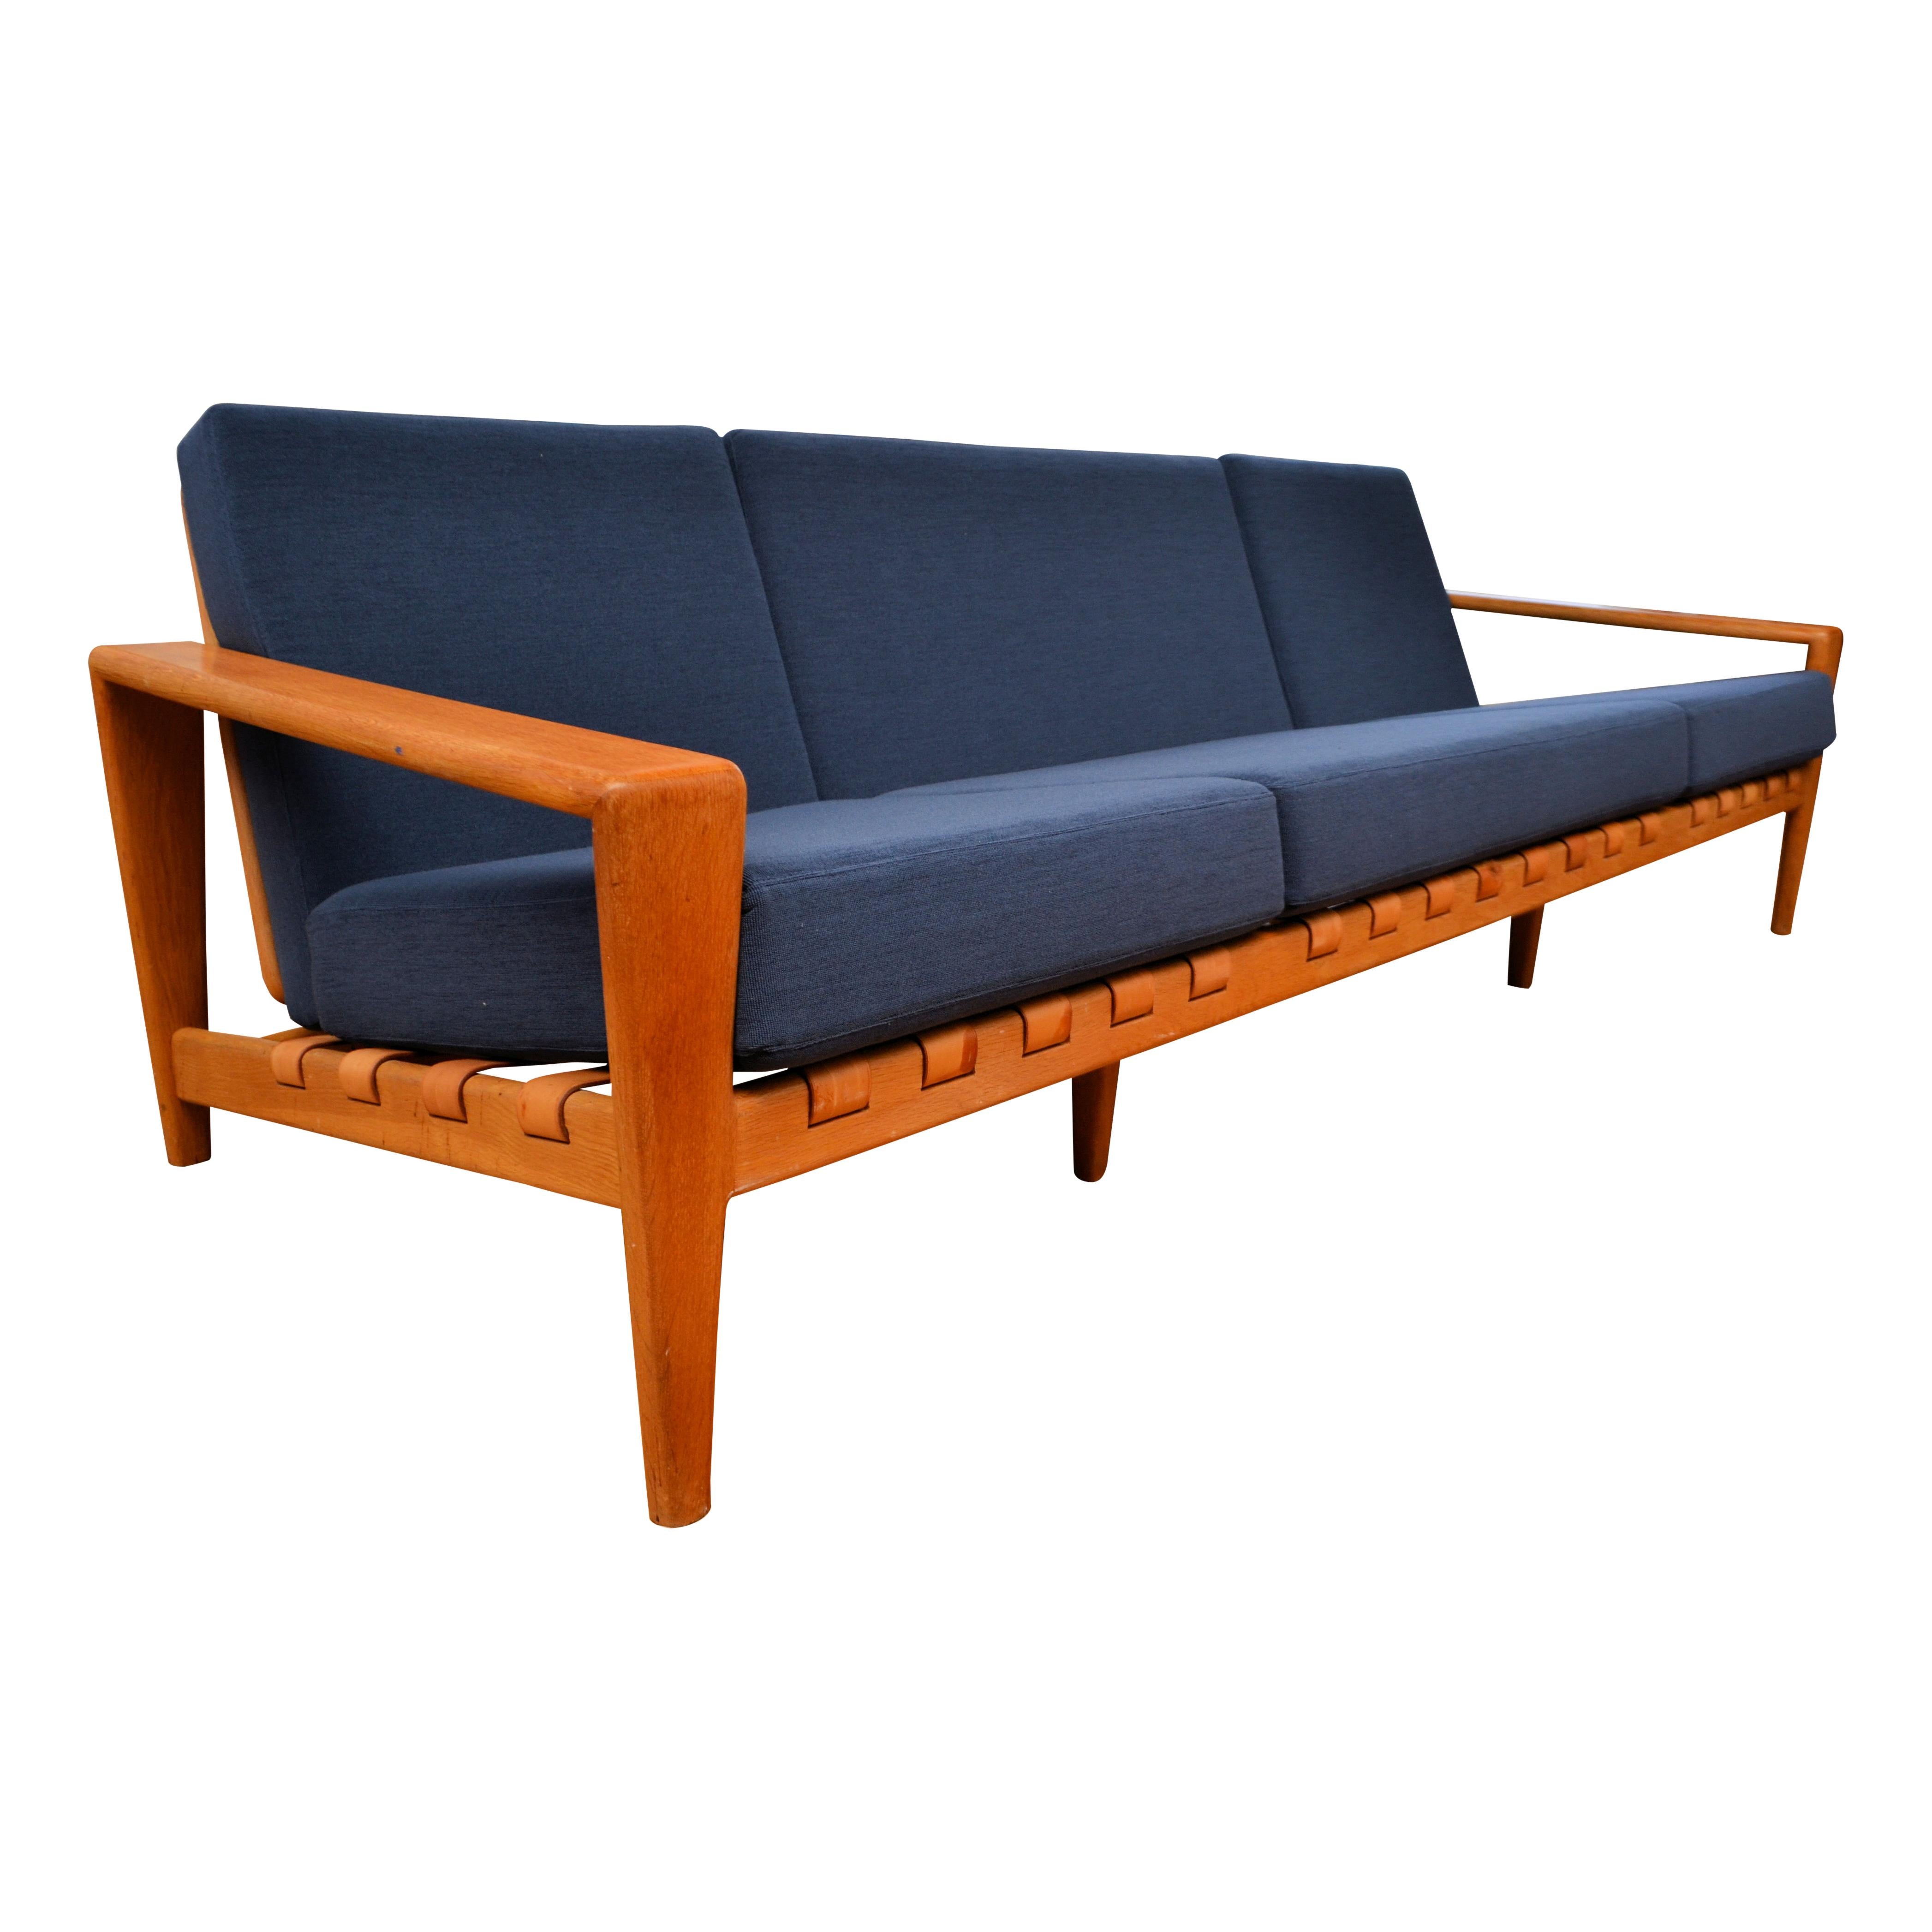 Rare vintage Swedish design 3.5 seater oak sofa, model Bodö. Designed by Svante Skogh for Säffle Möbler in the 1950s/60s. This iconic design piece has six loose cushions, which are equipped with new foam for an even more pleasant seating comfort. We